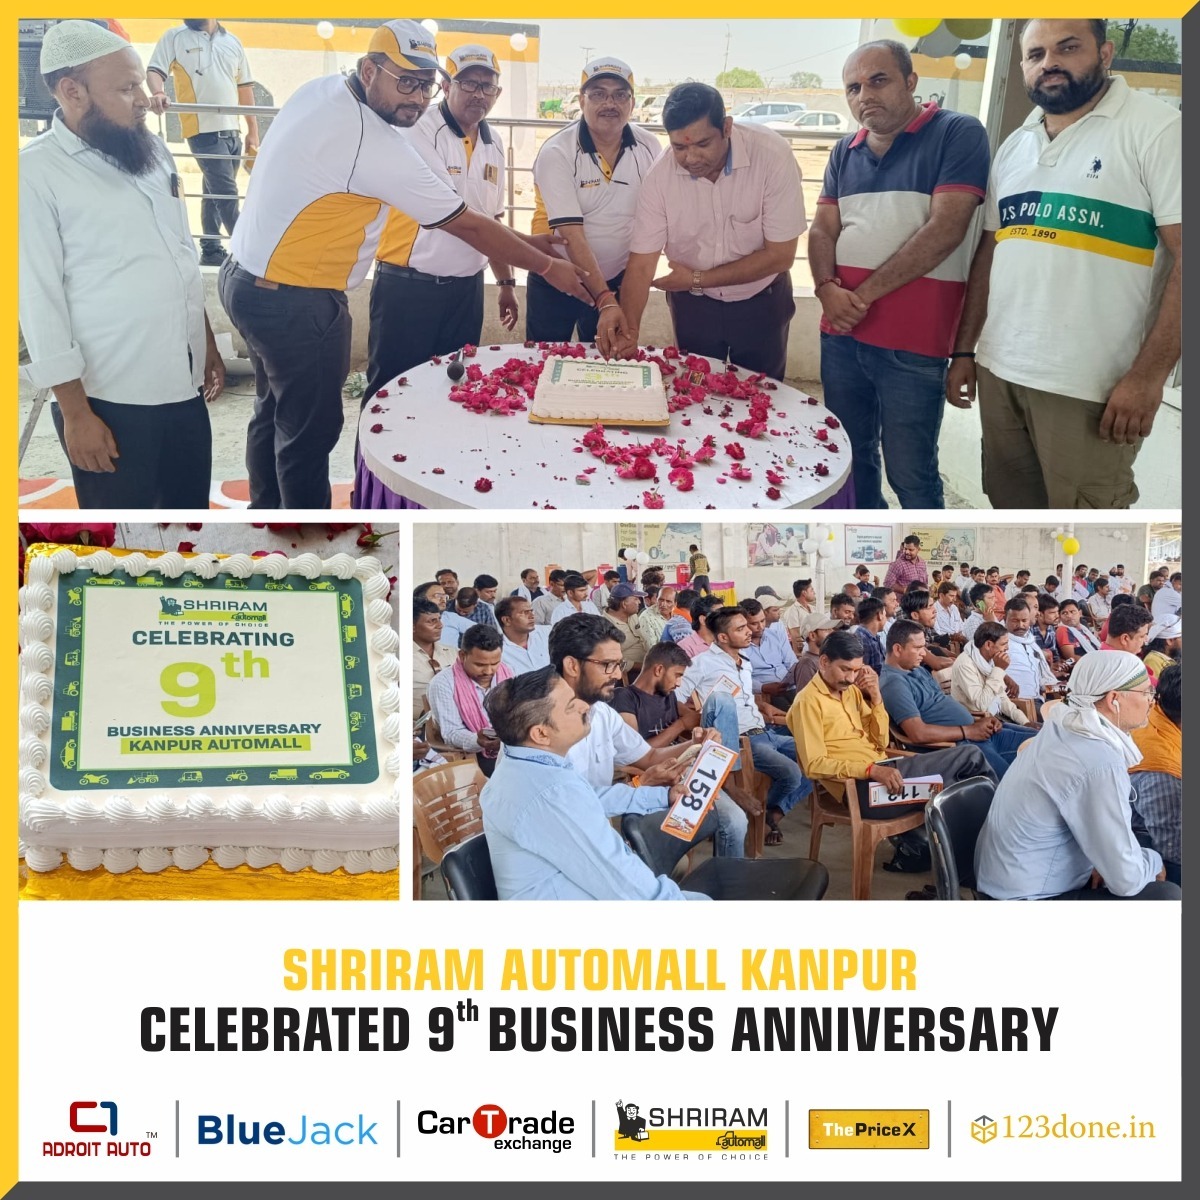 Shriram Automall Kanpur celebrated its 9th Business Anniversary on May 30th 2023. The event was celebrated by cake cutting ceremony. Here are some glimpses from the anniversary celebrations.

#PhysicalAuction #Samil #ShriramAutomall #ProudSamilian #KanpurAutomall #Anniversary